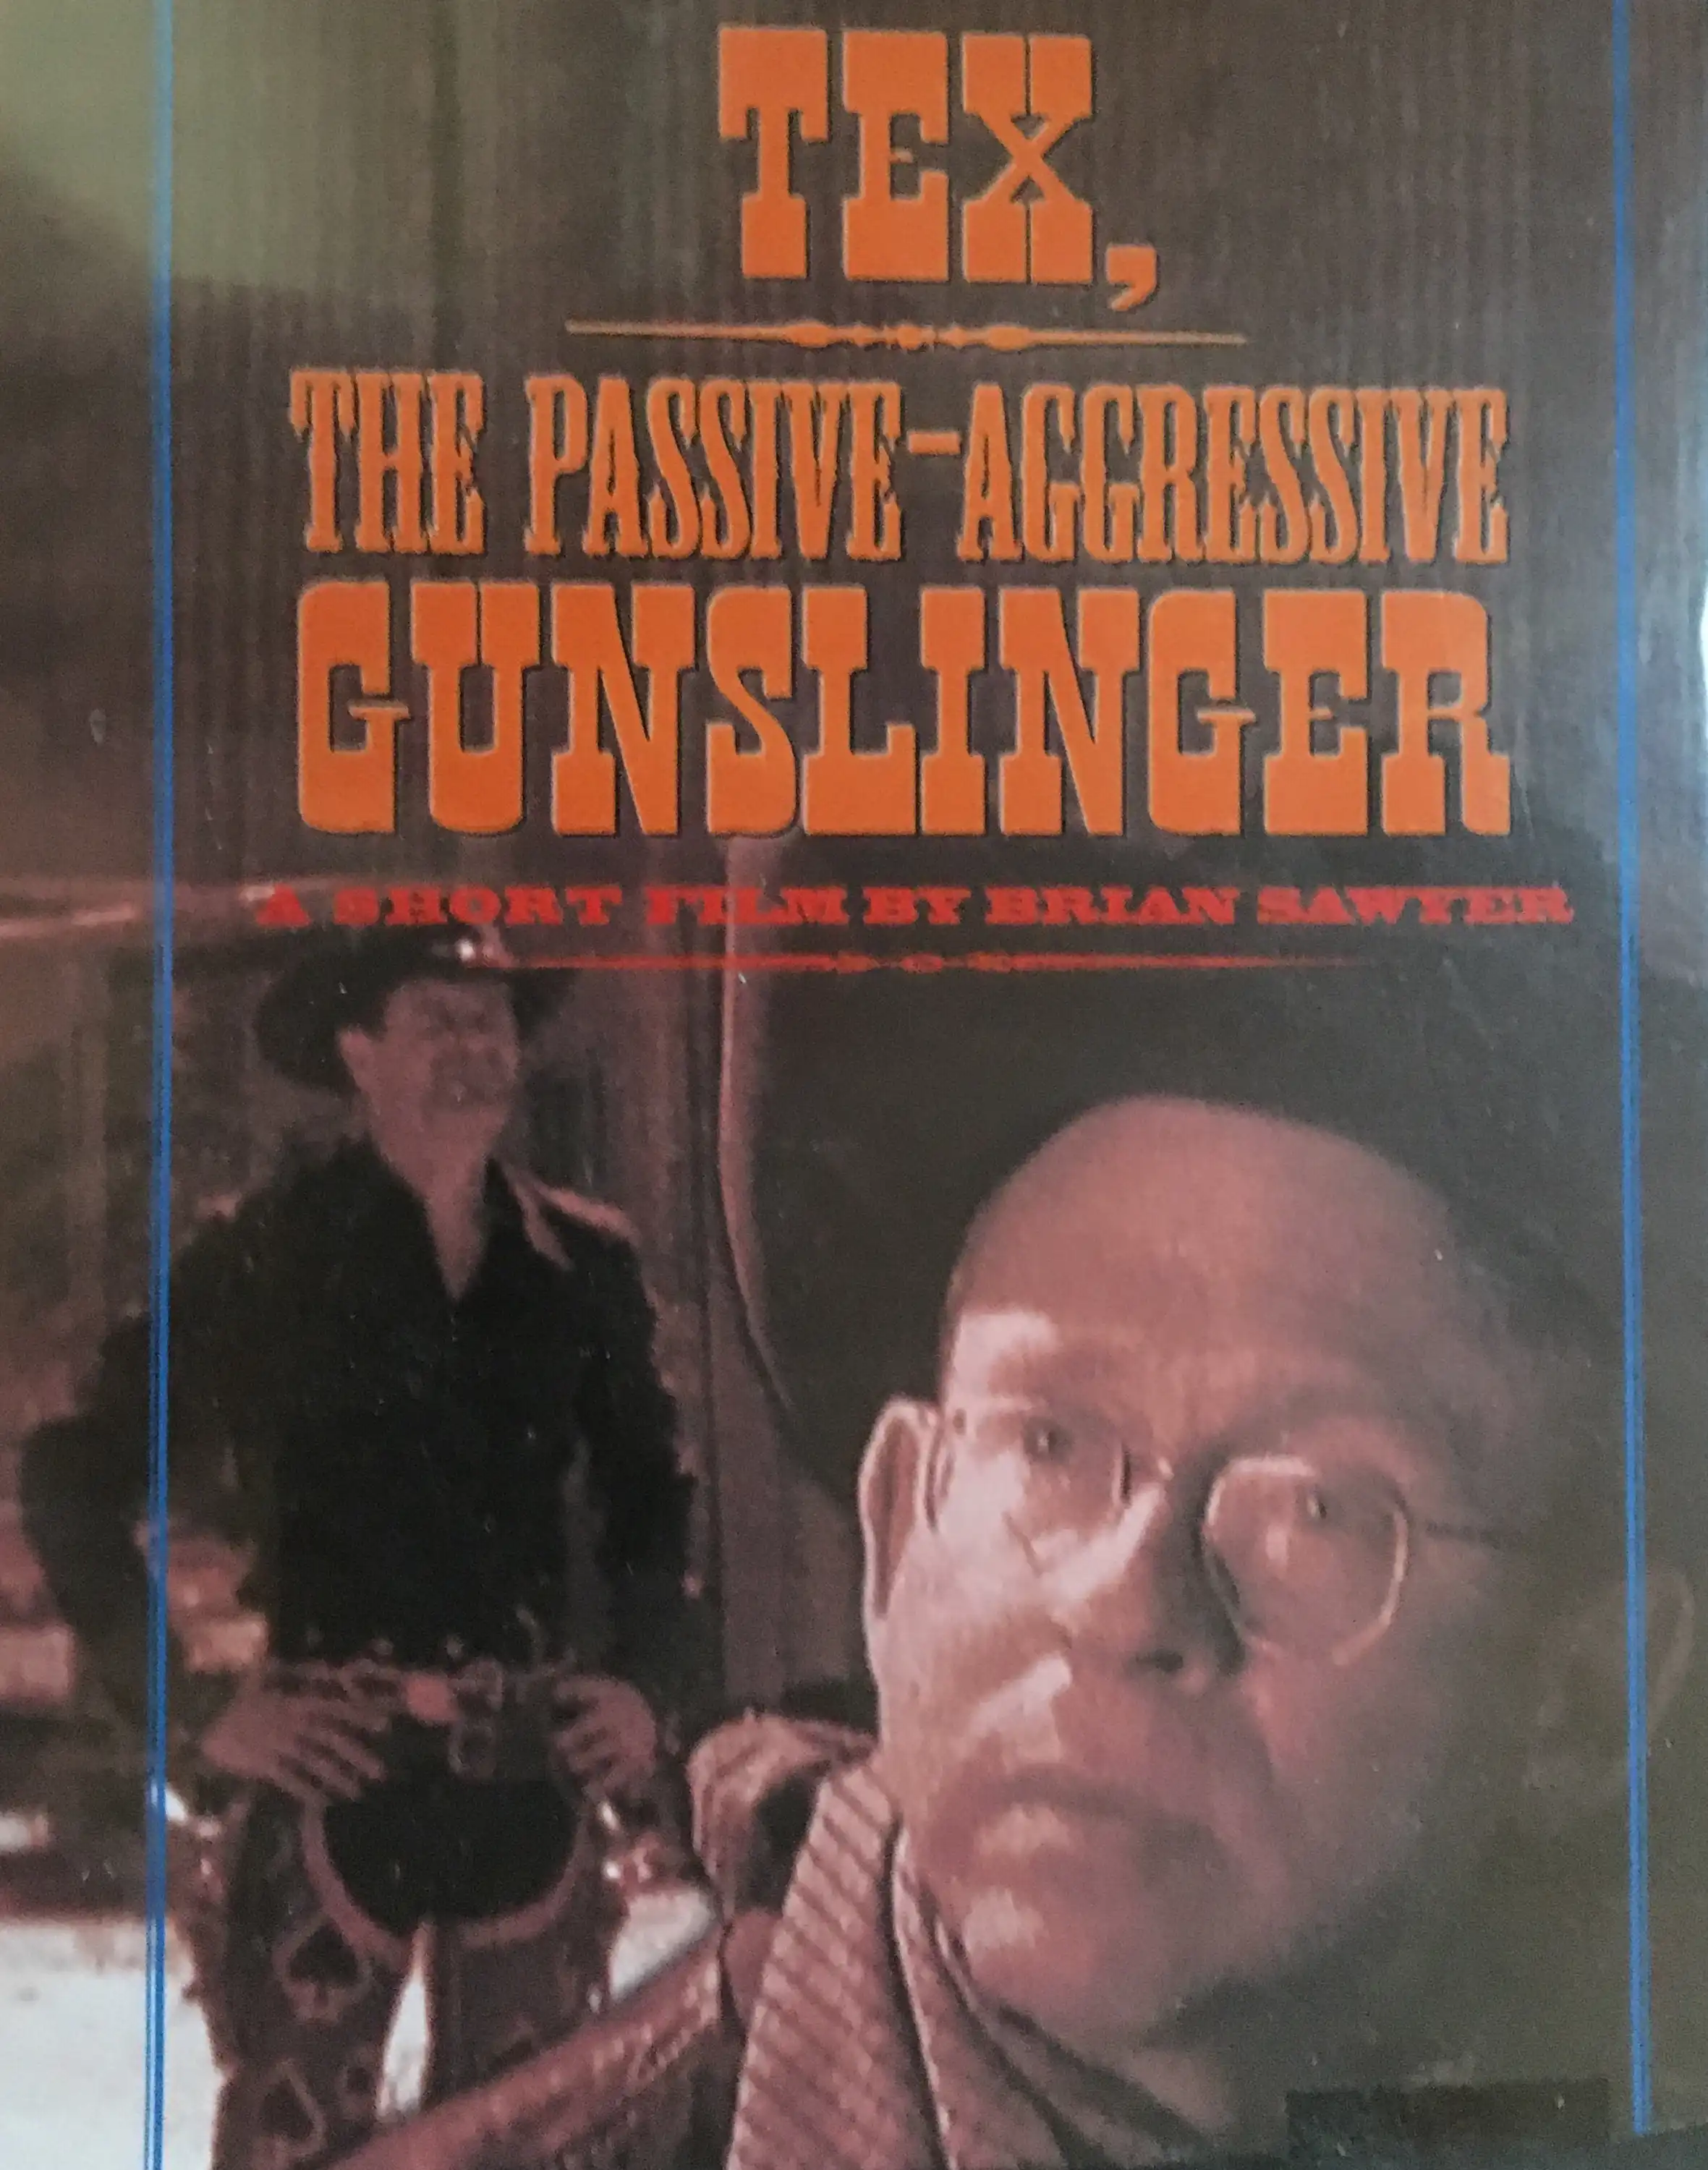 Watch and Download Tex, the Passive/Aggressive Gunslinger 1